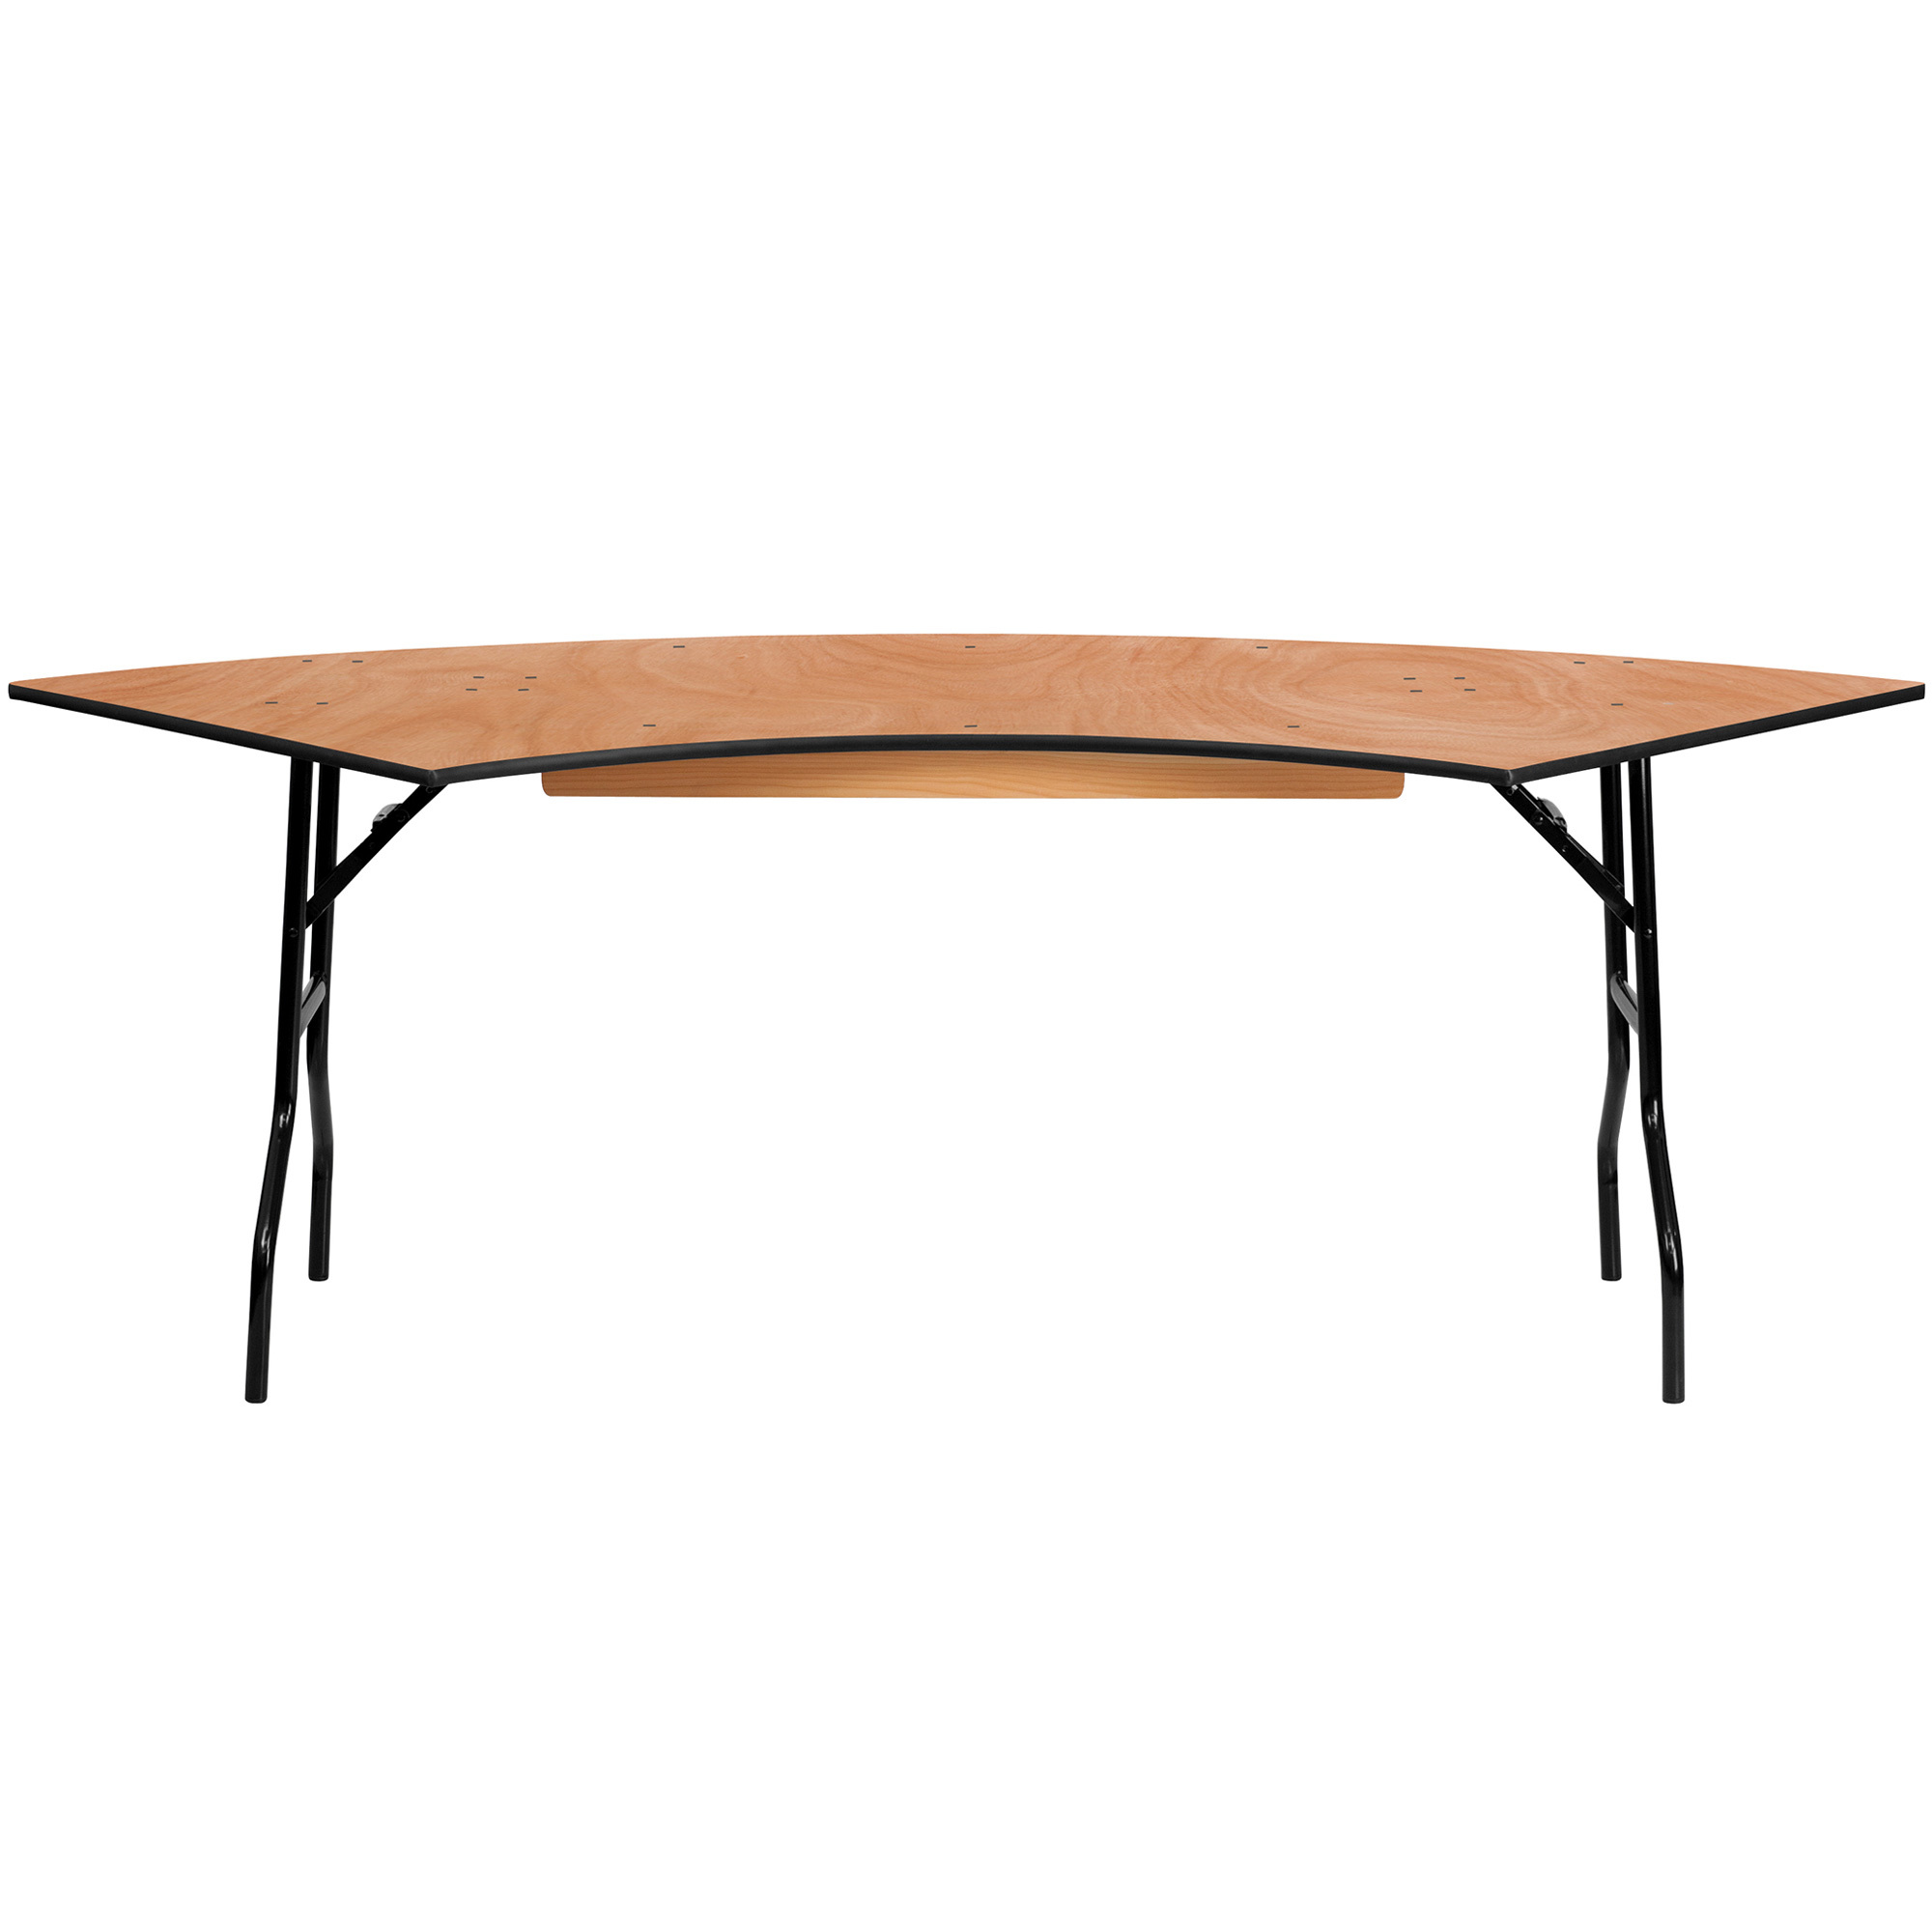 Flash Furniture Semi-Circular Folding Wood Banquet Table — Natural, 5ft.L x 2 1/2ft.W x 30 1/4Inch Height, Model YTWSFT6030SP -  YT-WSFT60-30-SP-GG